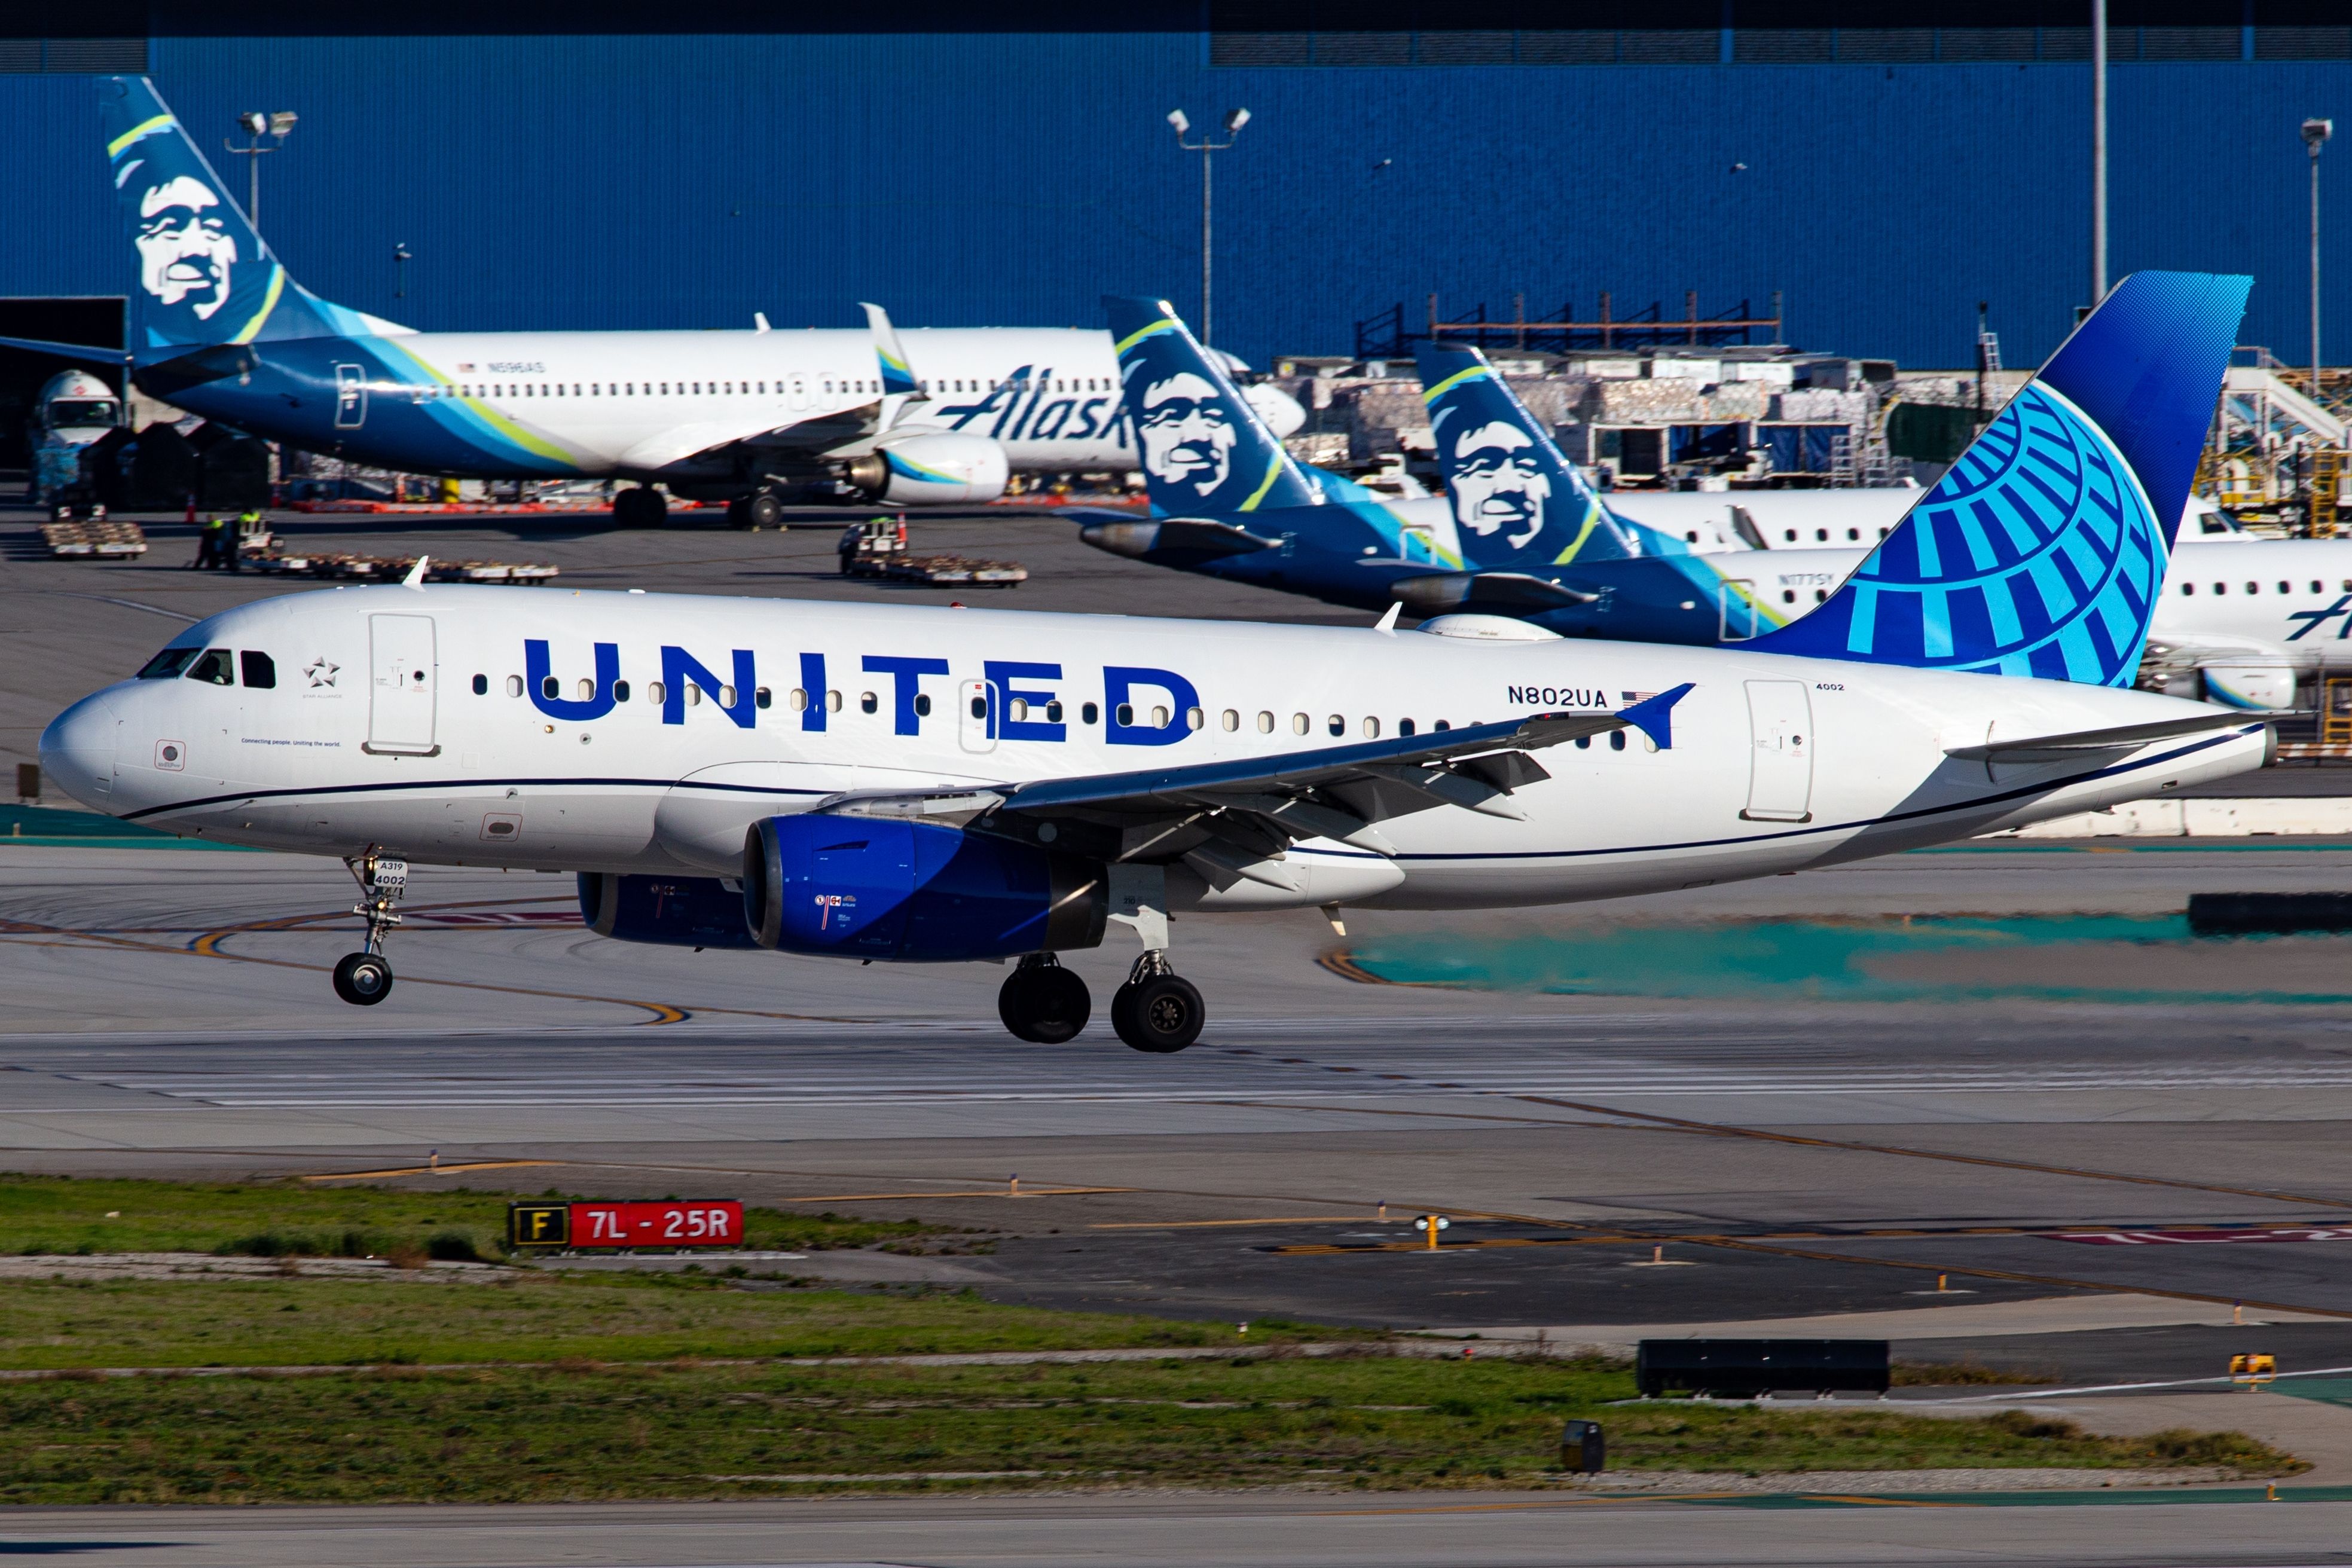 A United Airlines Airbus A319